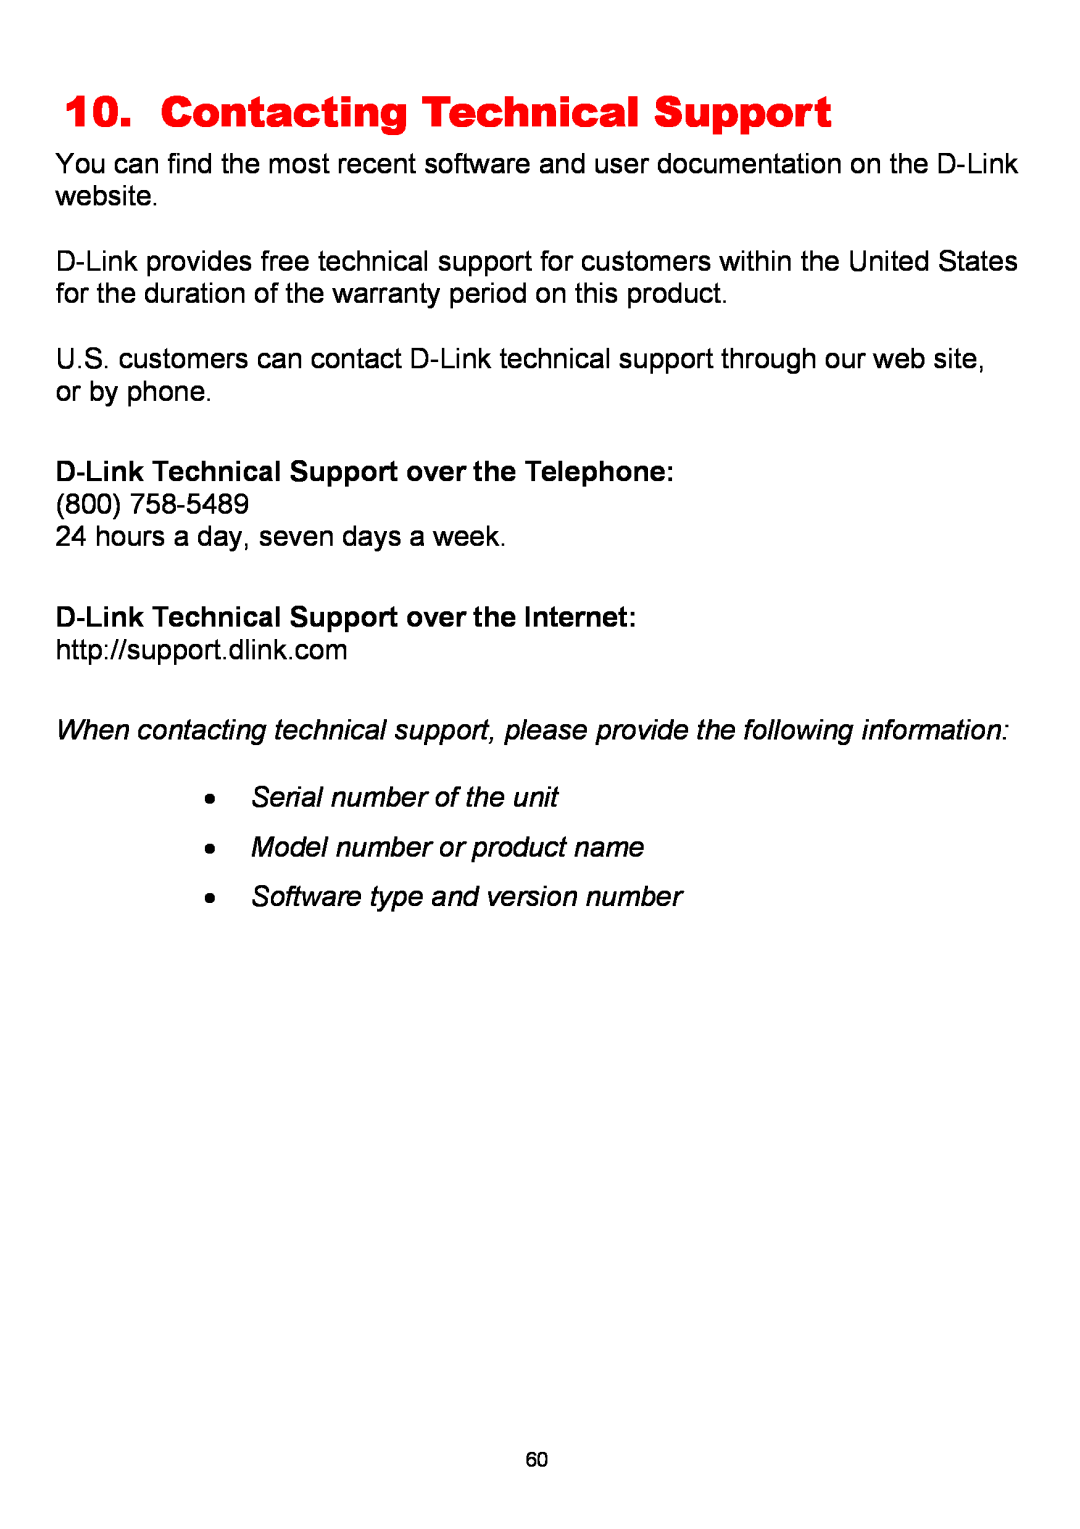 D-Link DWL-650+ Contacting Technical Support, D-Link Technical Support over the Internet, Software type and version number 